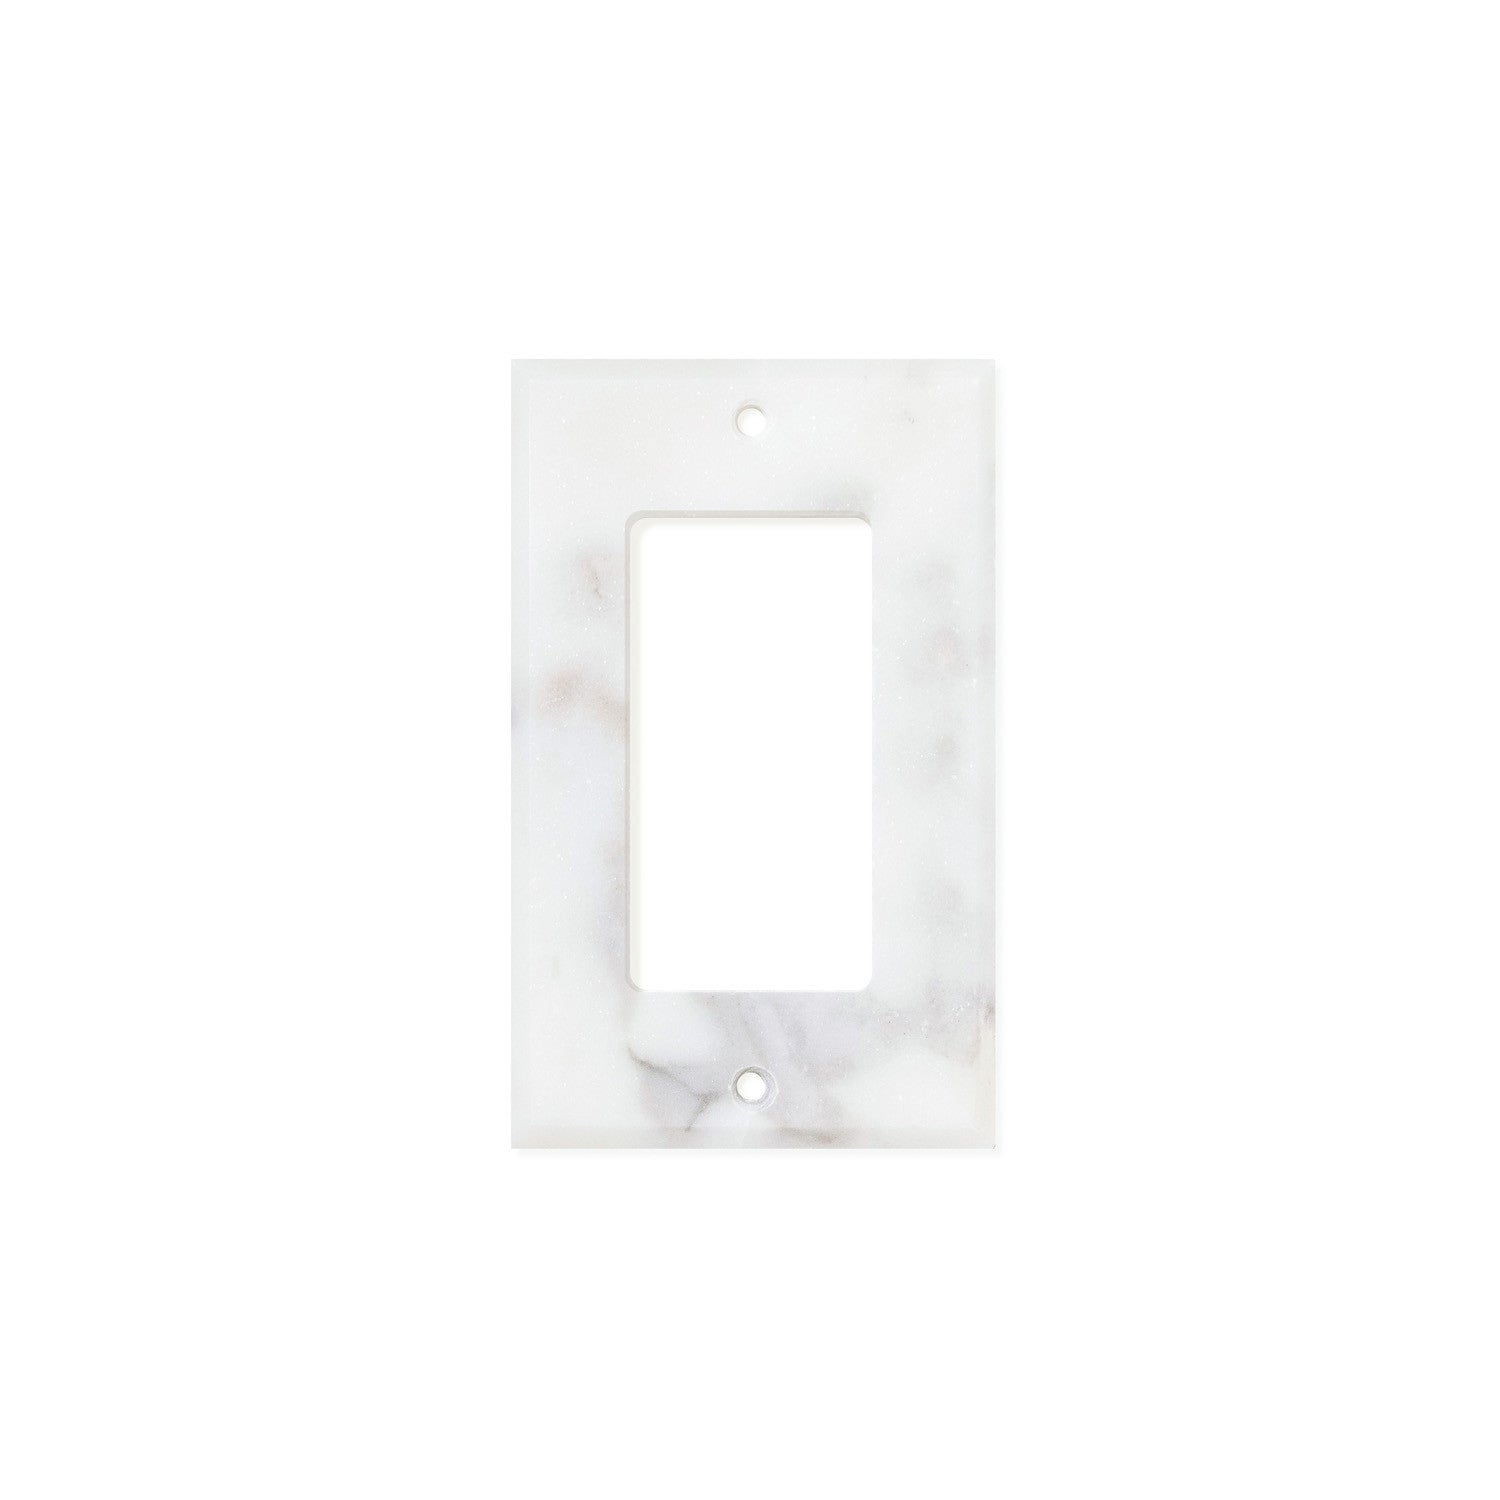 Calacatta Gold Marble Switch Plate Cover, Honed (SINGLE ROCKER) - Tilephile